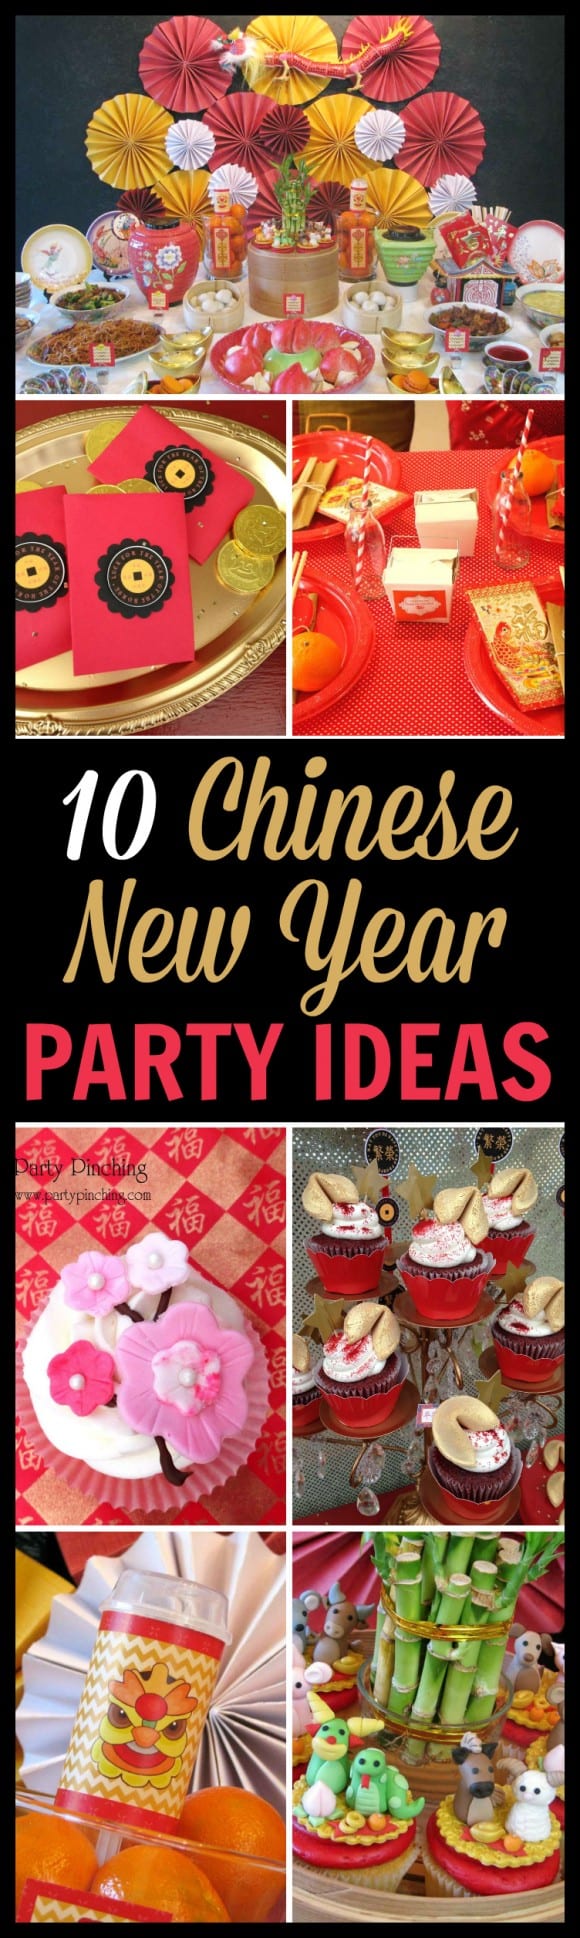 Chinese New Year | CatchMyParty.com